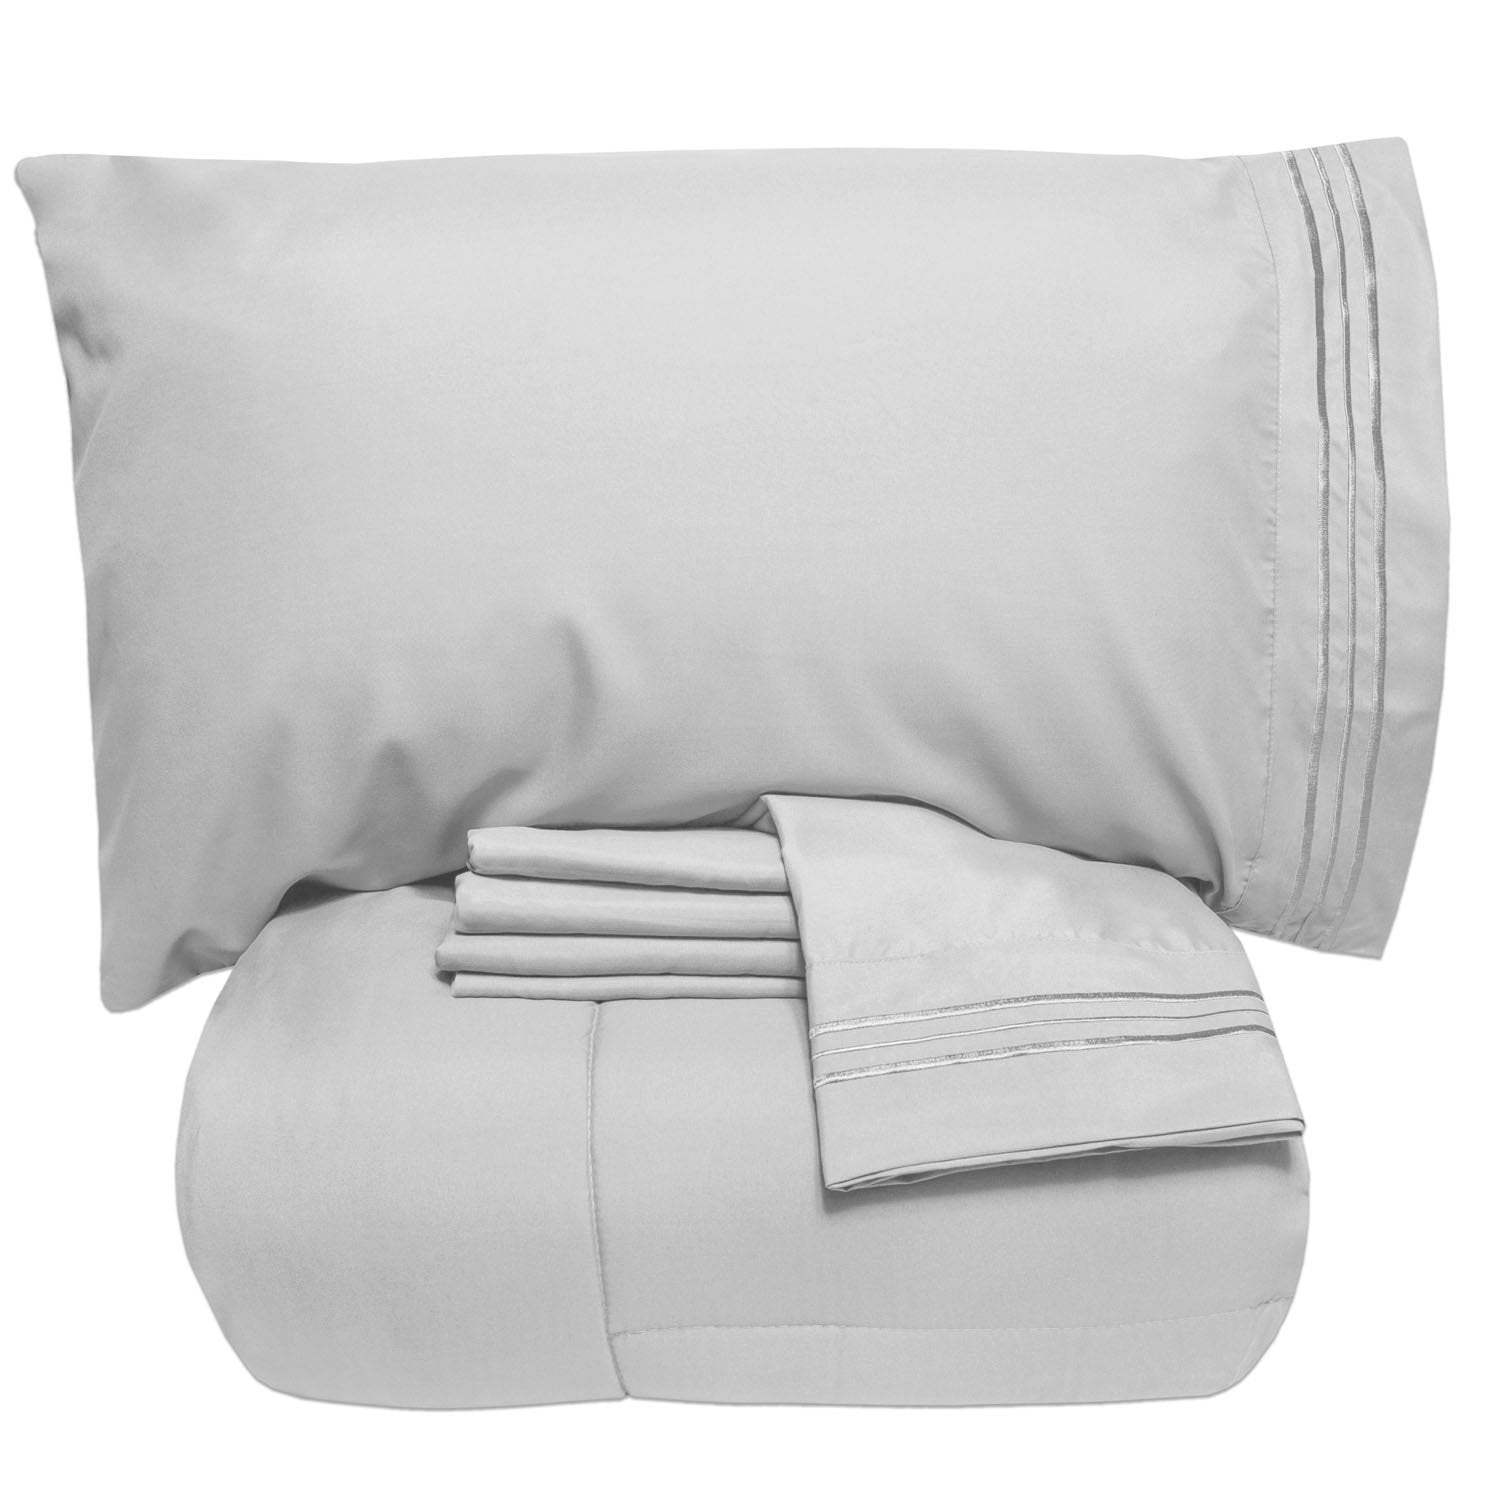 Basic 5-Piece Bed in a Bag  Set Silver - Folded